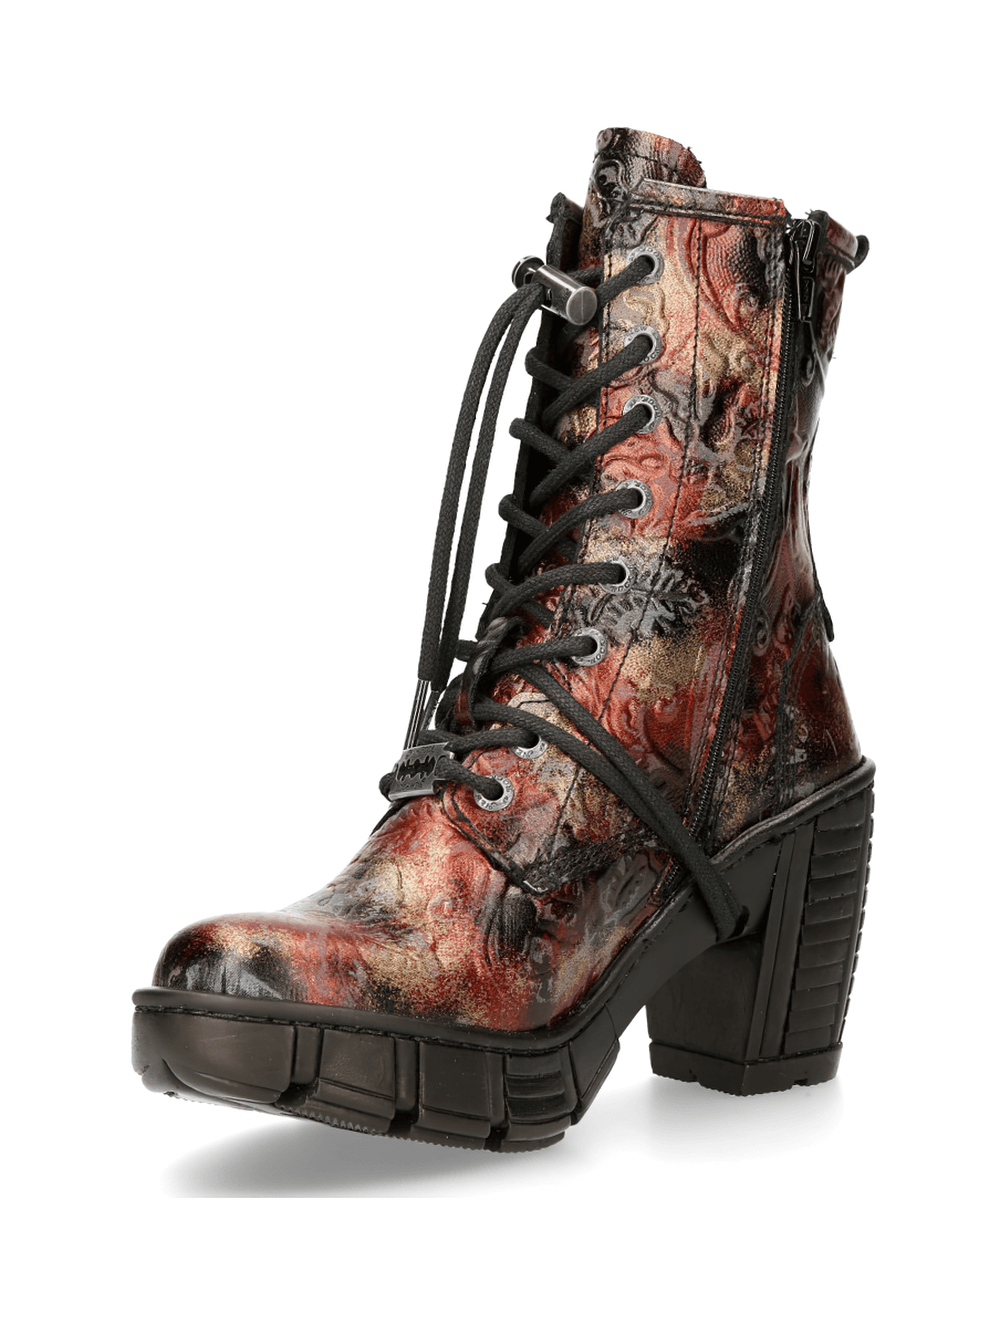 NEW ROCK Gothic Artwork Ankle Boots with Metallic Sheen